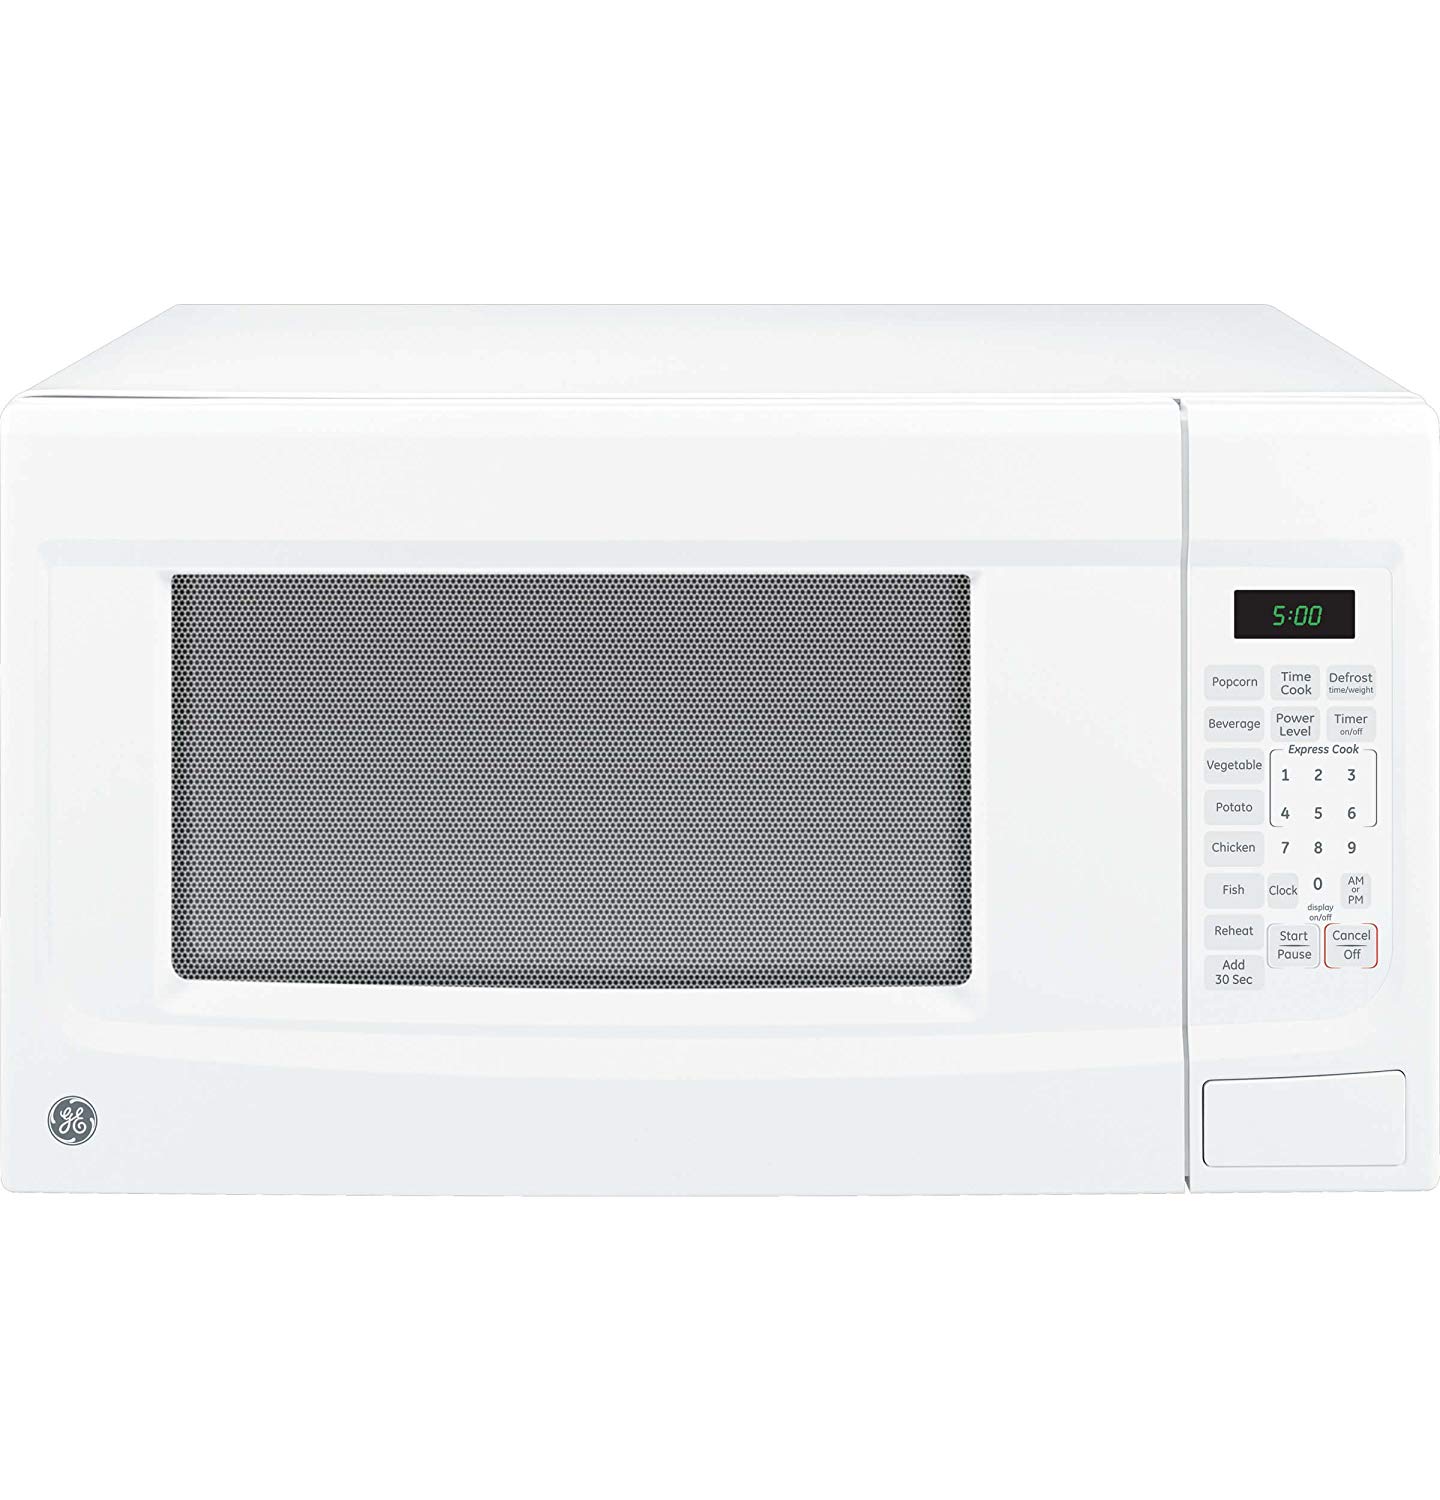 GE JES1460DSWW 1.4 cu. ft. Countertop Microwave – White